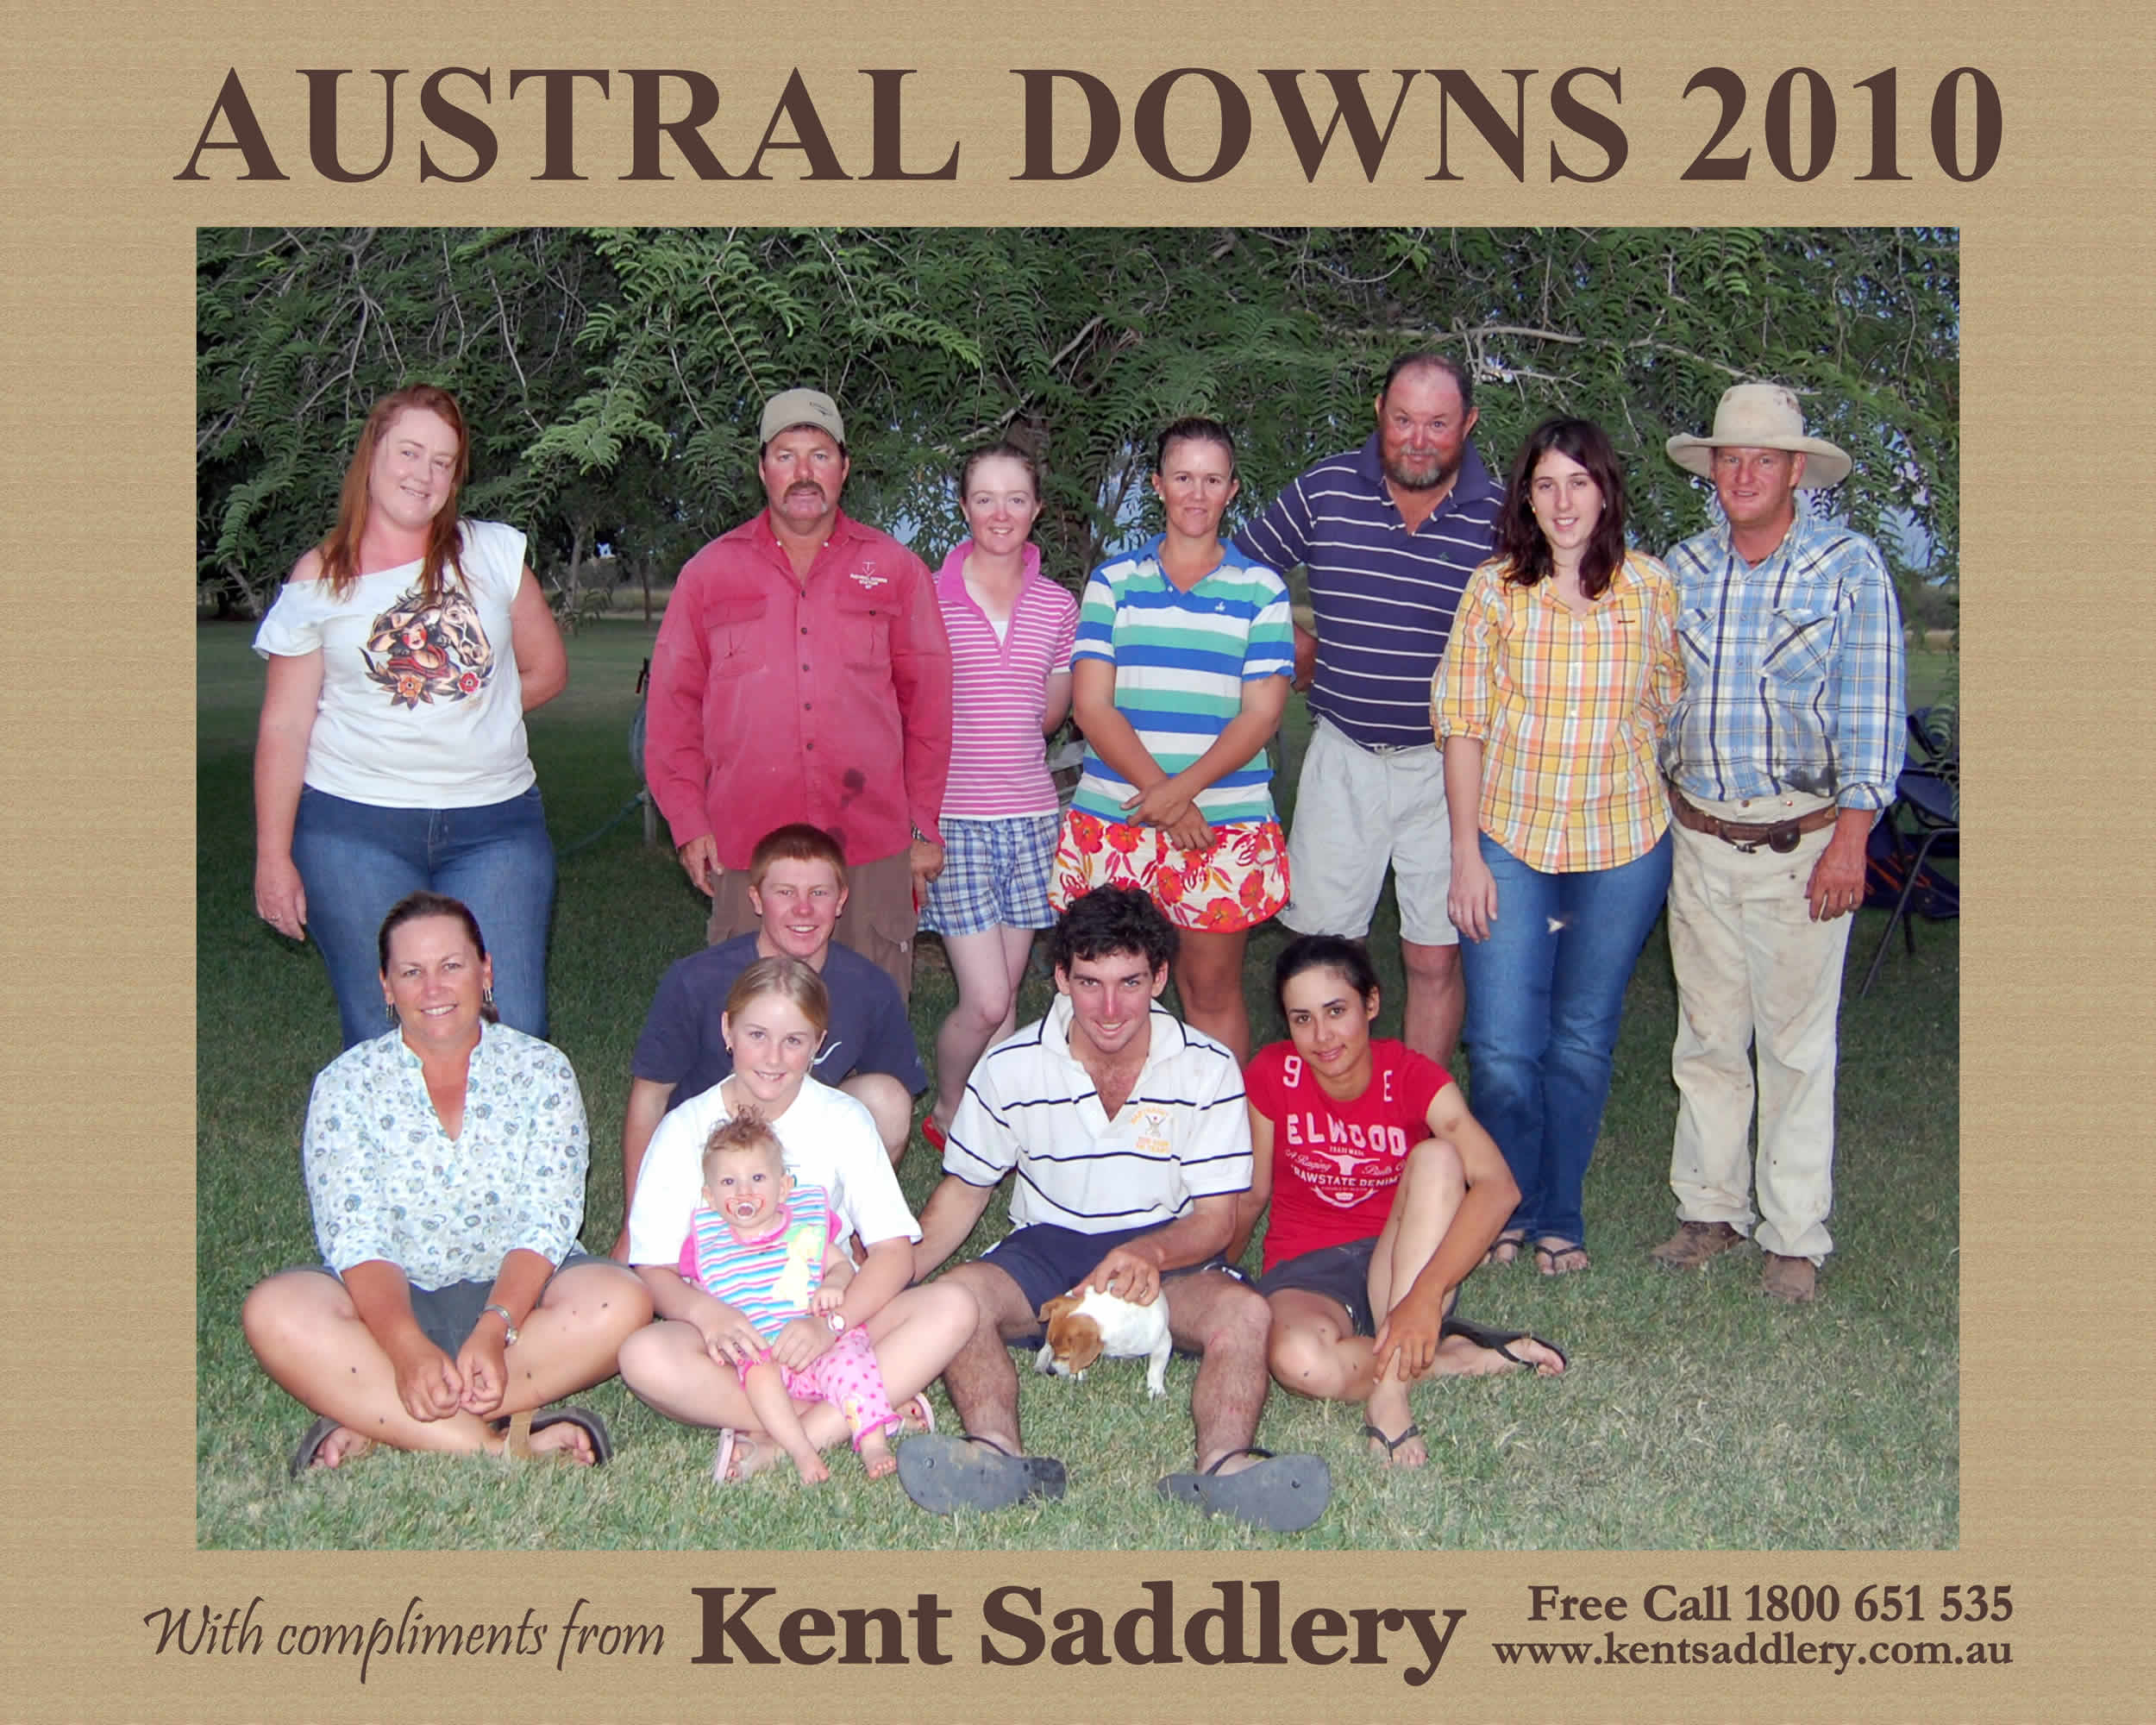 Northern Territory - Austral Downs 14